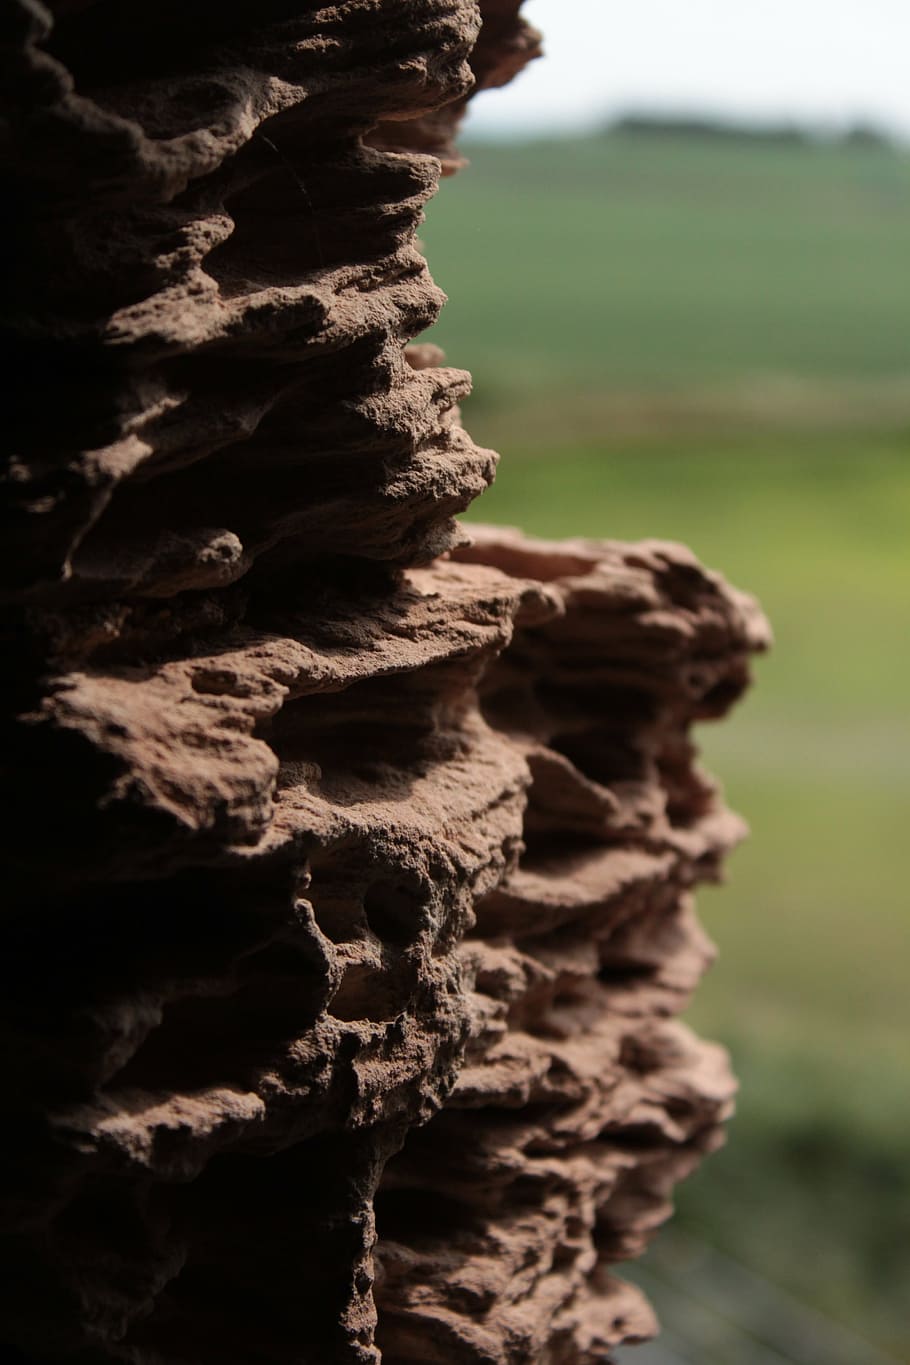 brick, stone, formation, field, holes, clay, focus on foreground, day, nature, close-up